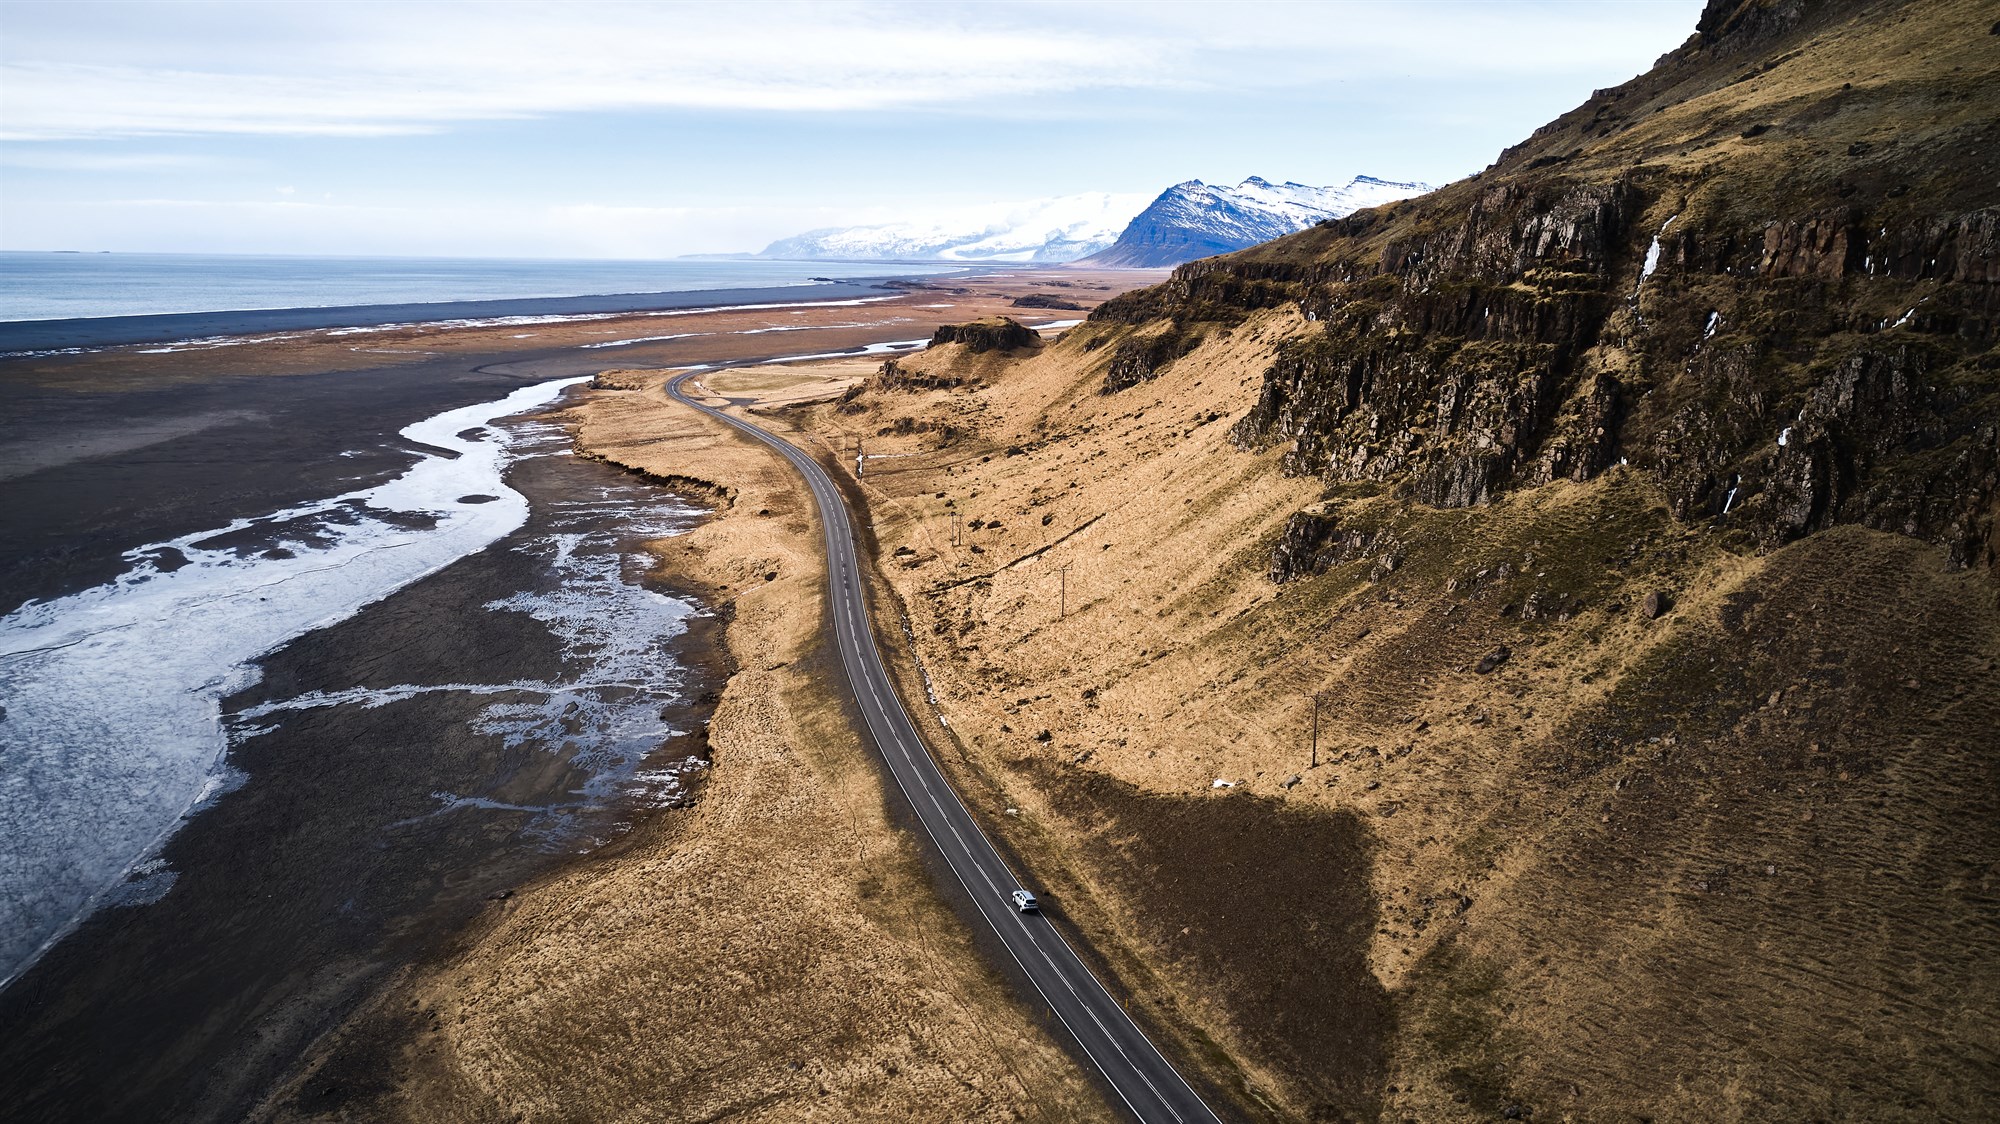 Rent a Dacia Duster and drive around the Ring Road of Iceland